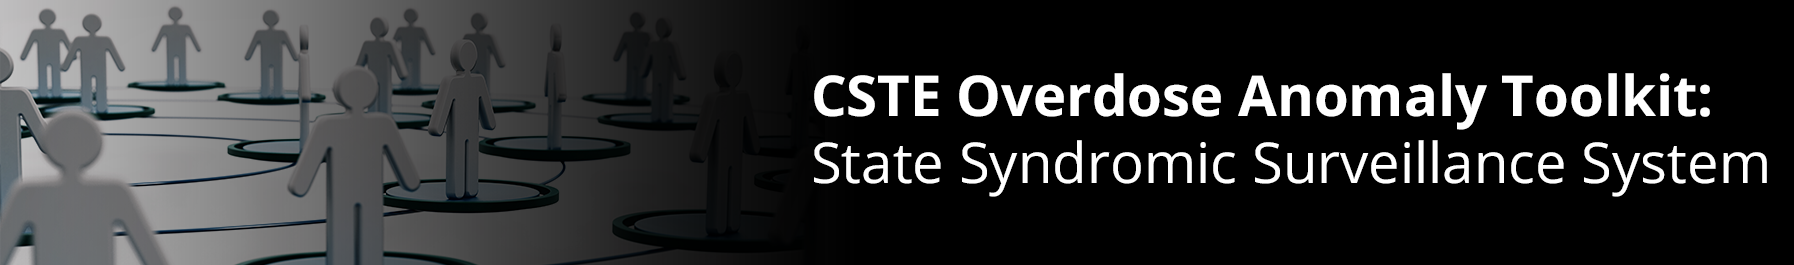 CSTE Overdose Anomaly Toolkit: State Syndromic Surveillance System